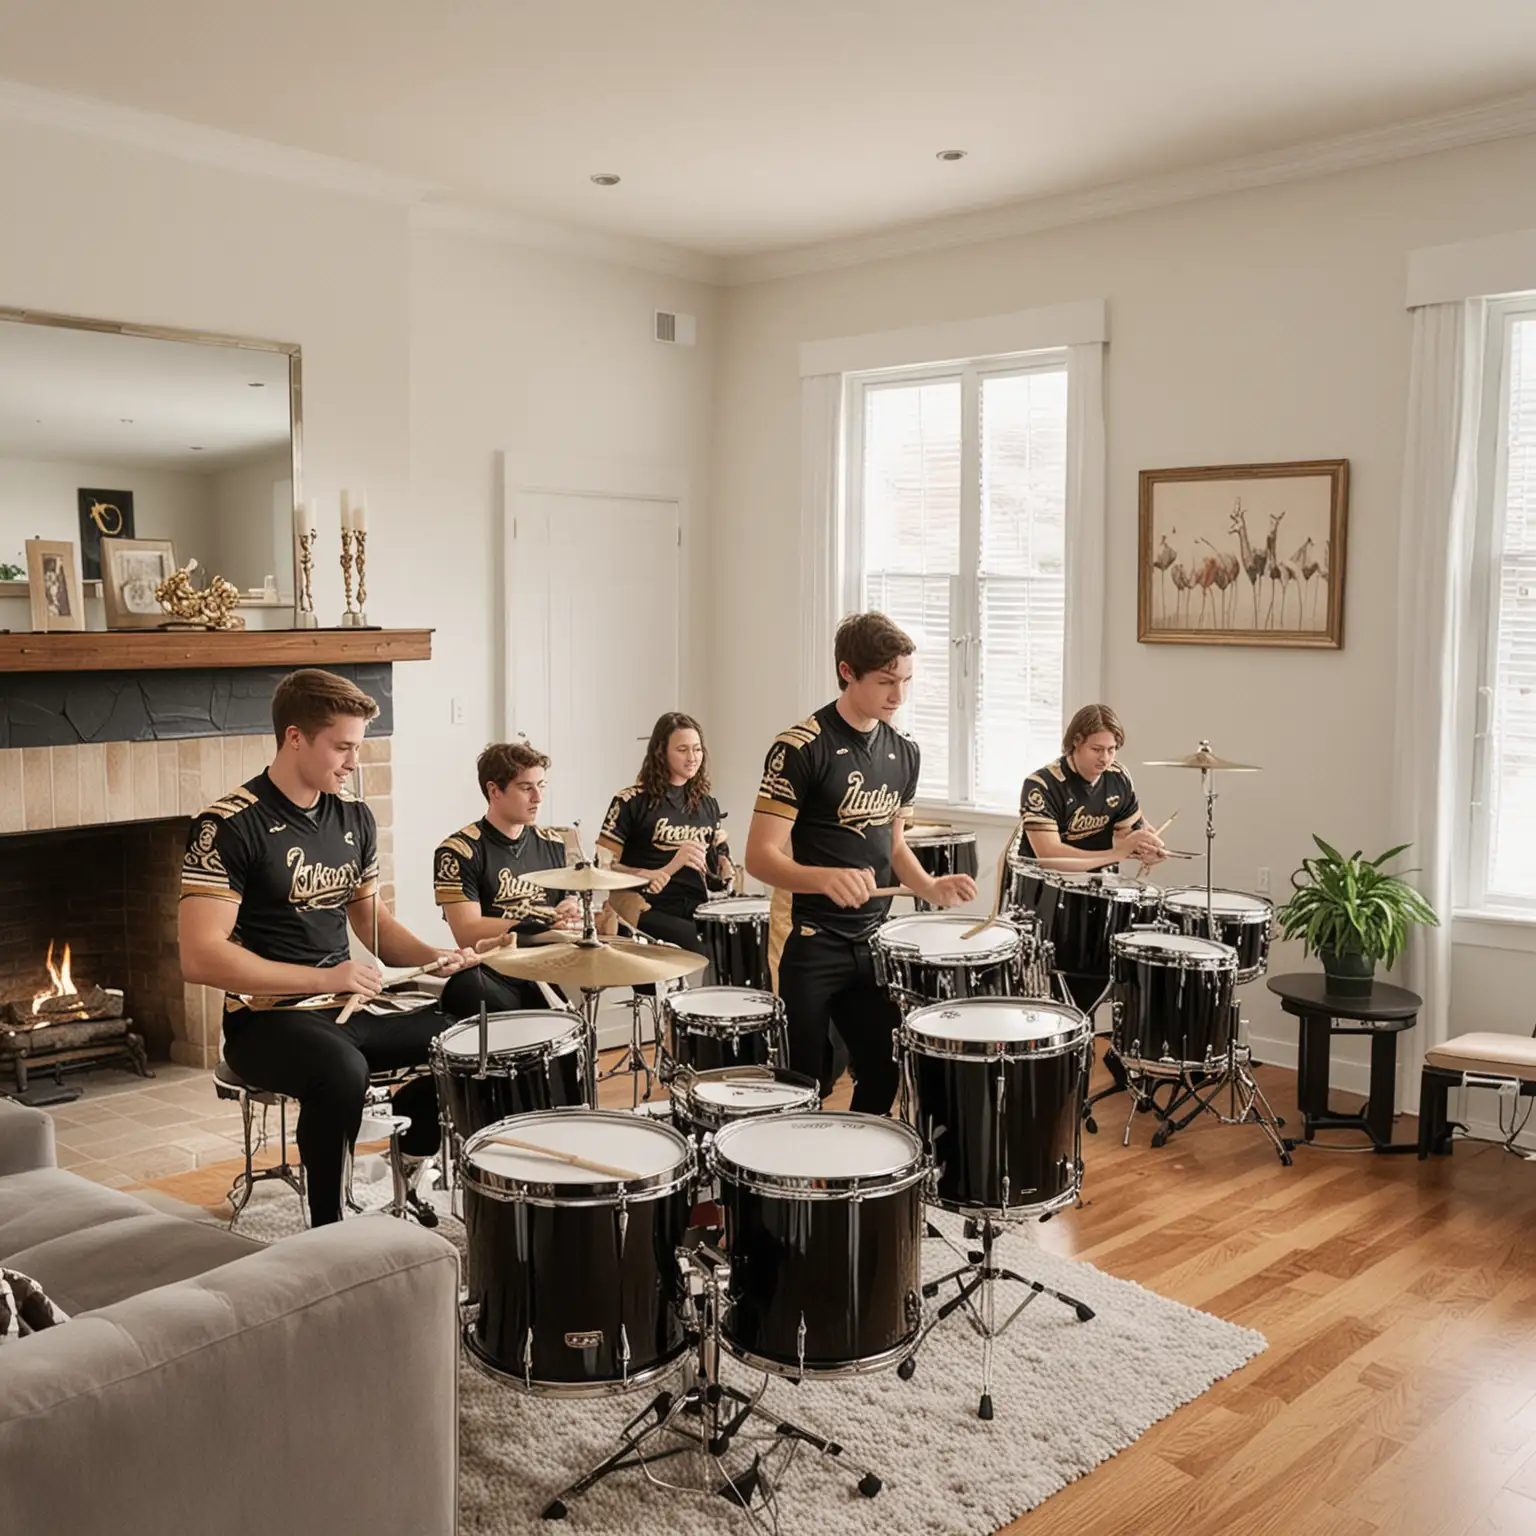 Dynamic High School Marching Band Drummers in a Vibrant Living Room Setting